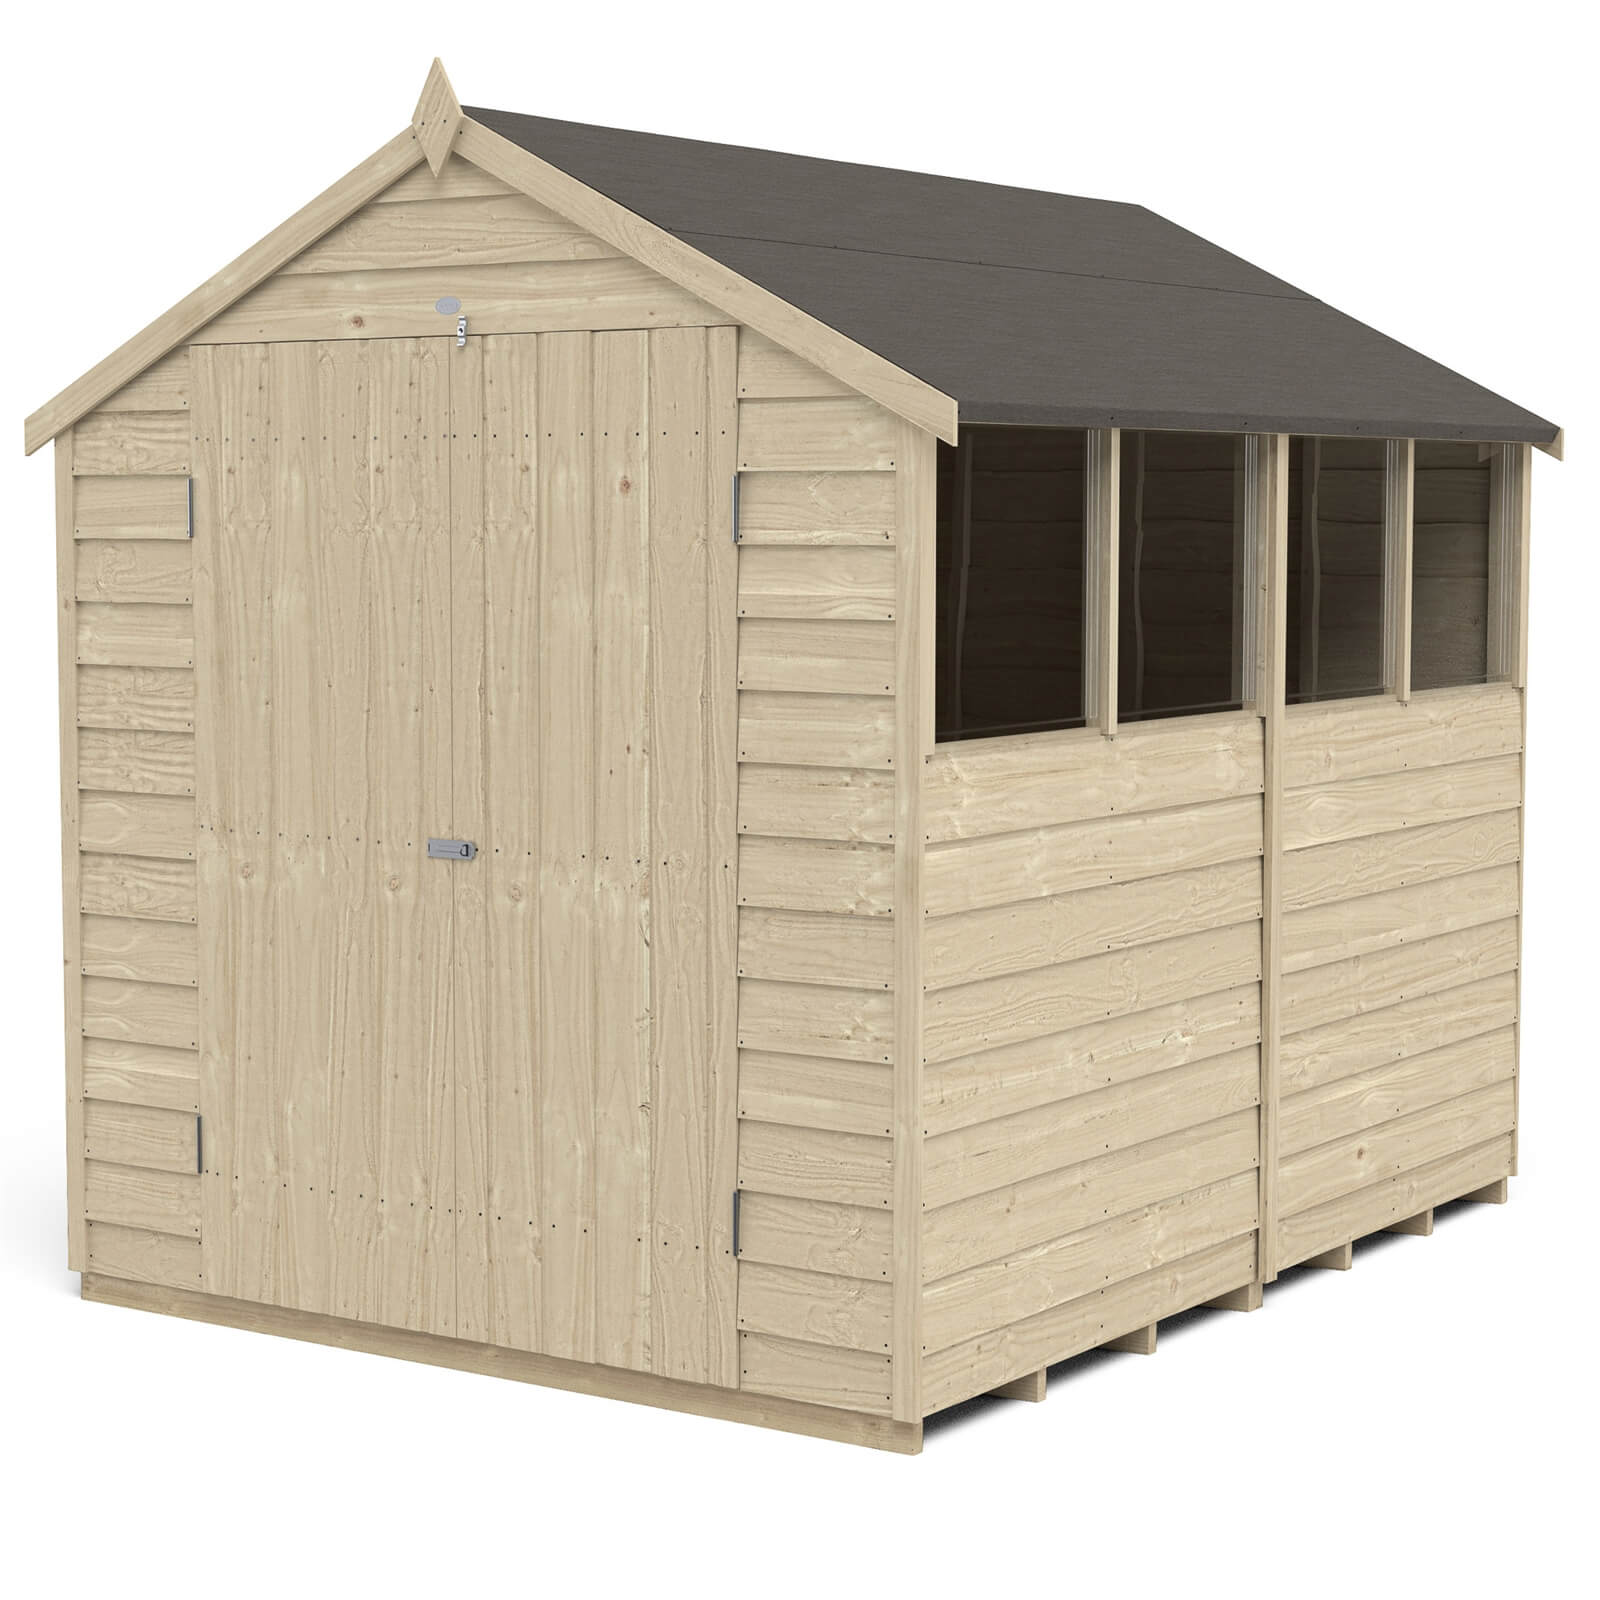 Forest 6 x 4ft Overlap Pressure Treated Apex Shed - Double Door 4 Windows